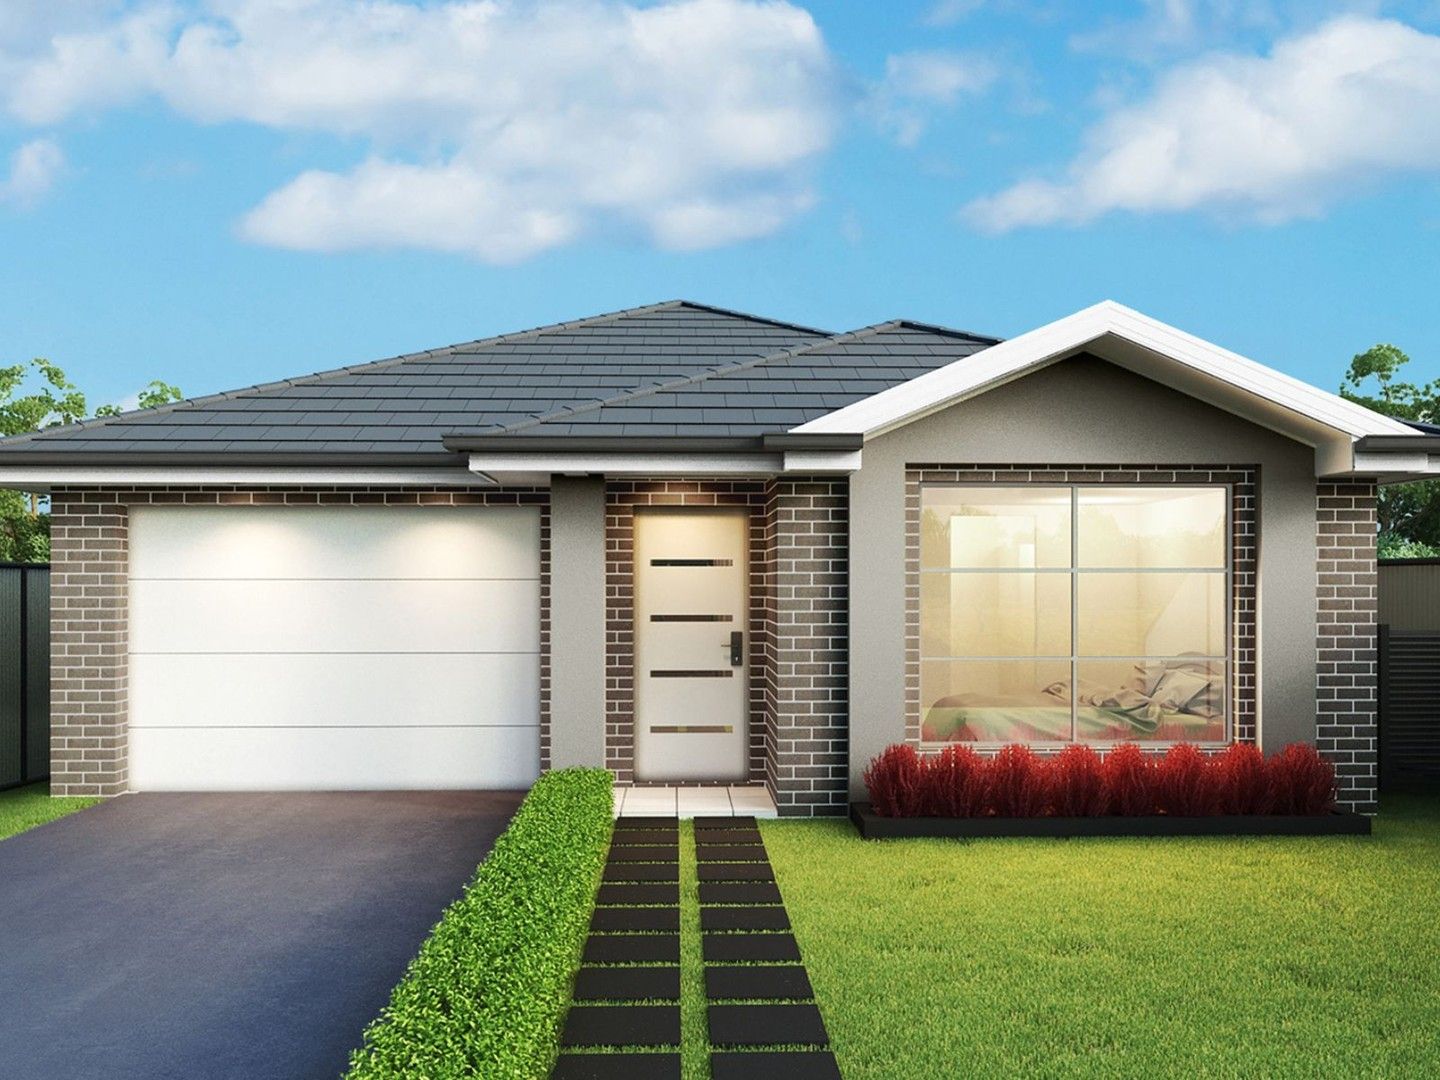 4 bedrooms New House & Land in Limited Time offer $60k Off on Package BOX HILL NSW, 2765